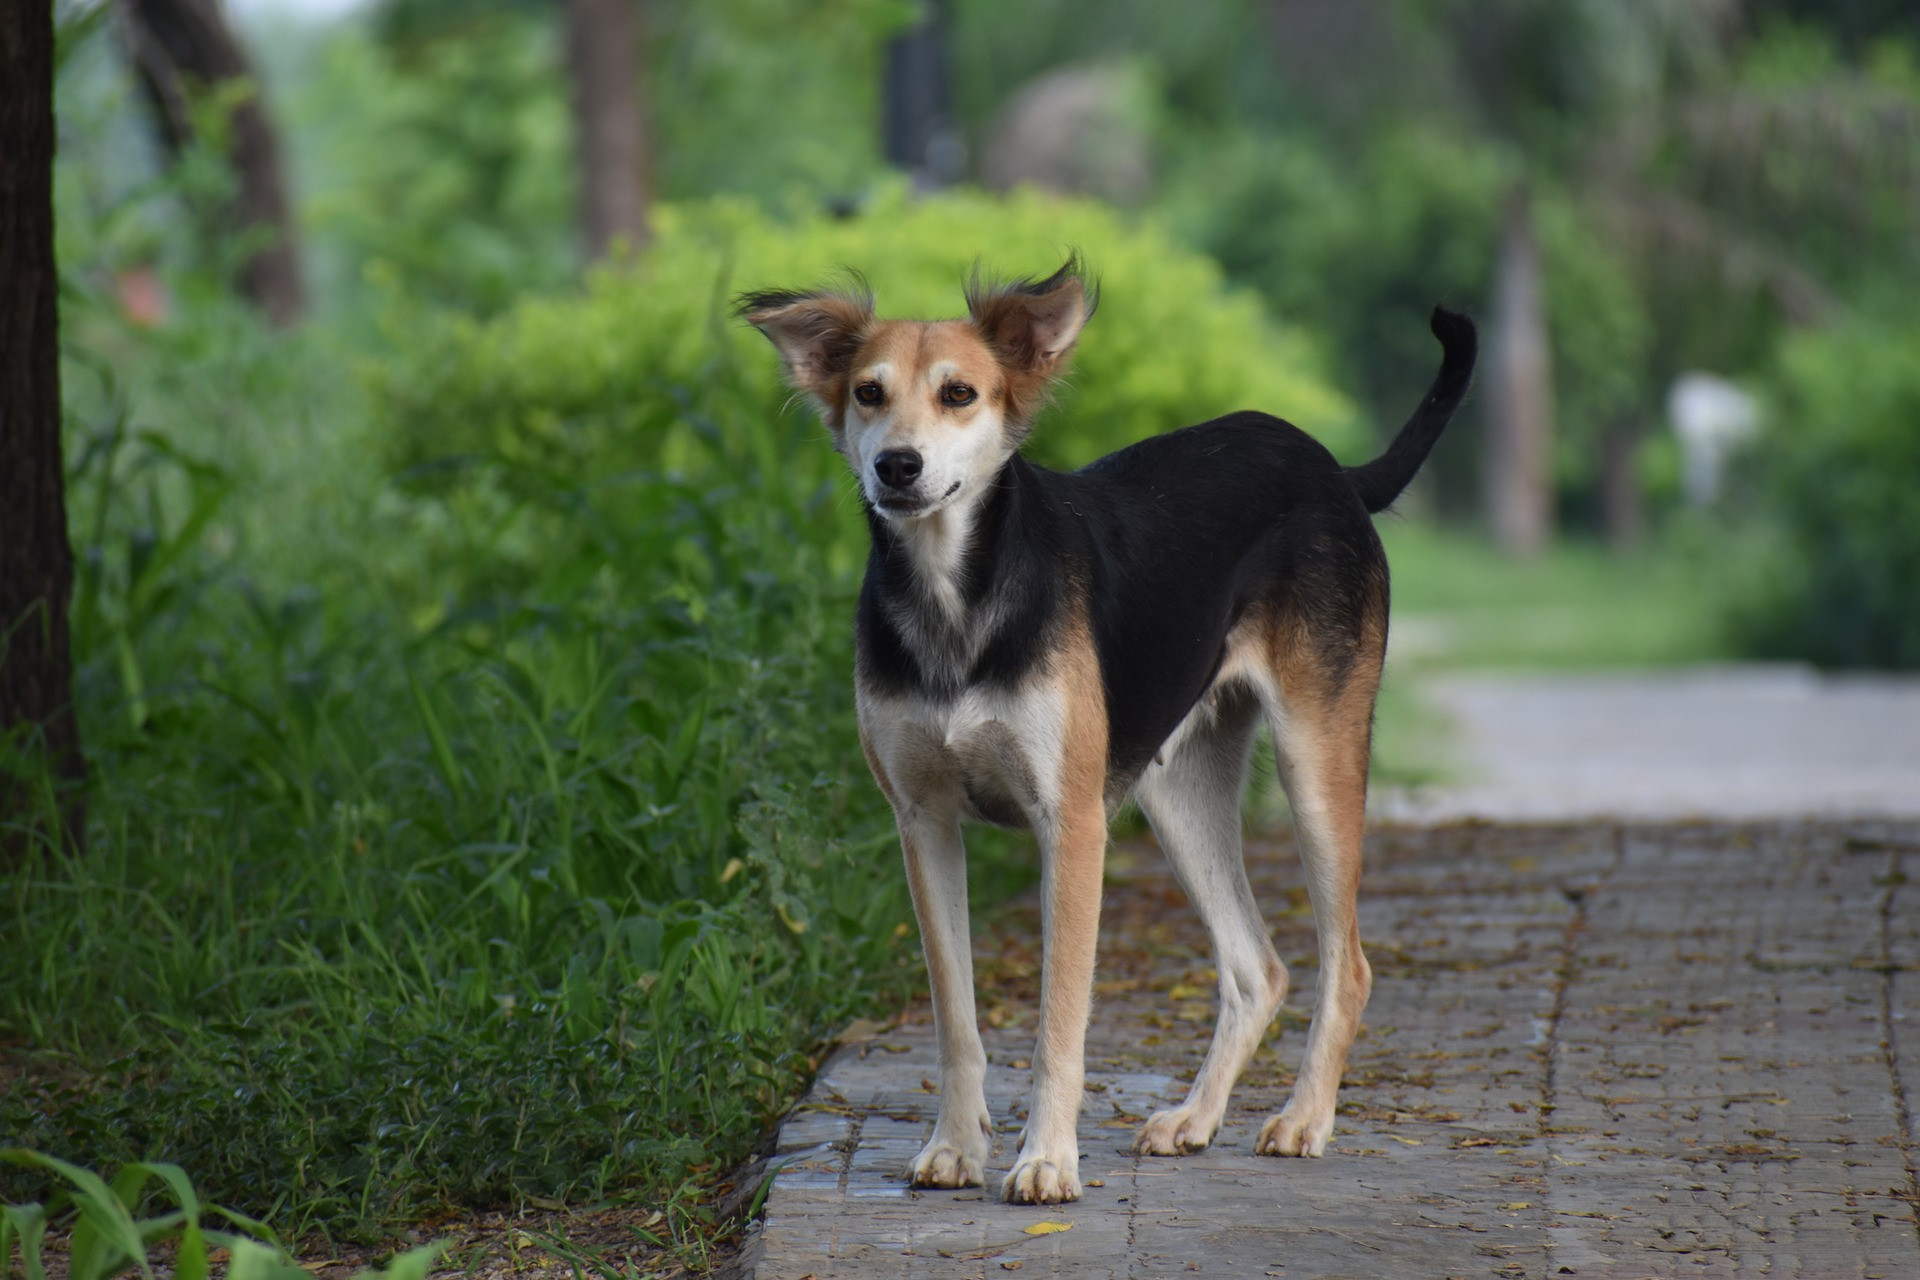 5 Reasons Why Street Dogs Make the Best Adoption Candidates?